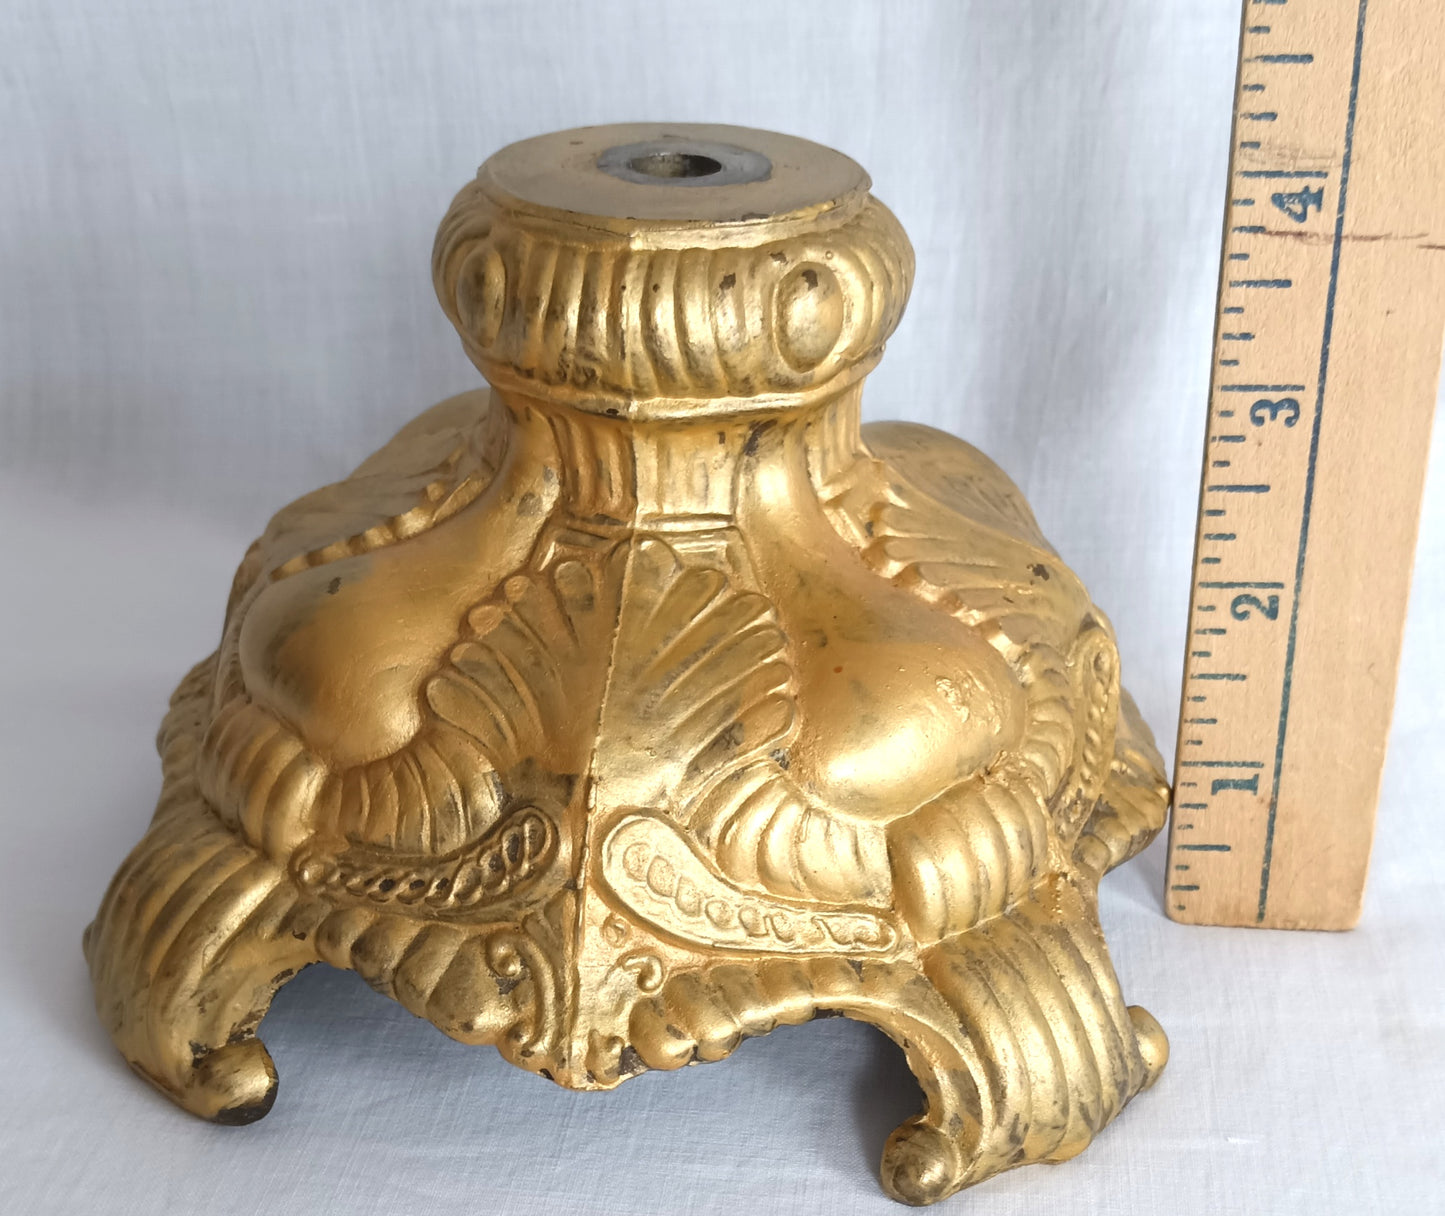 Vintage Die Cast Metal Lamp Base Gold Finish Footed Victorian Style Lamp Part –DYI Project